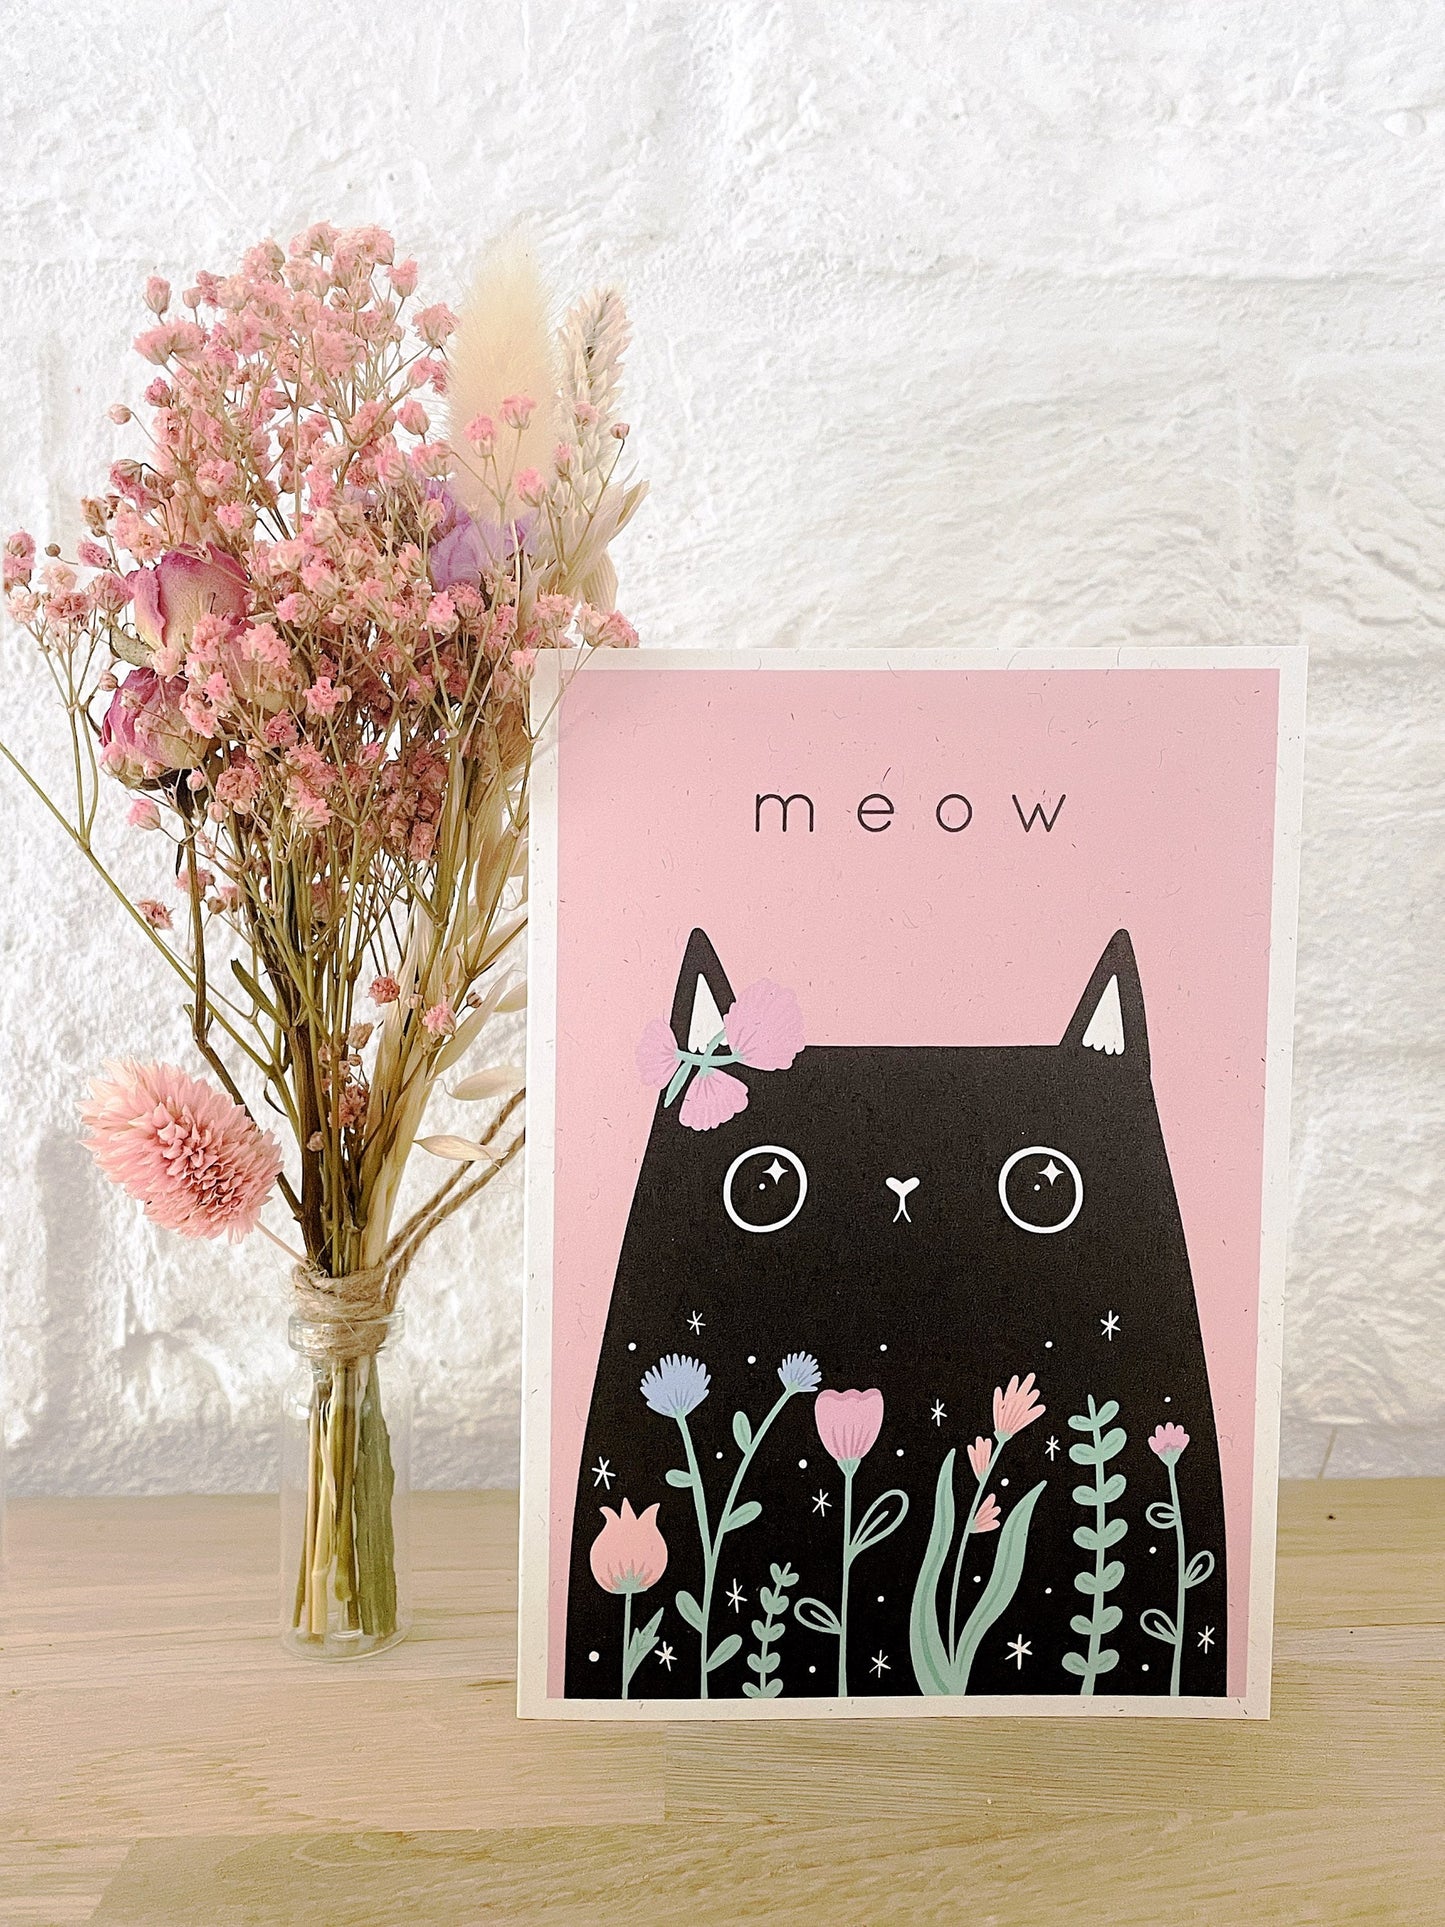 Eco friendly black cat card A6 greeting card on recycled stock, blank for your own message